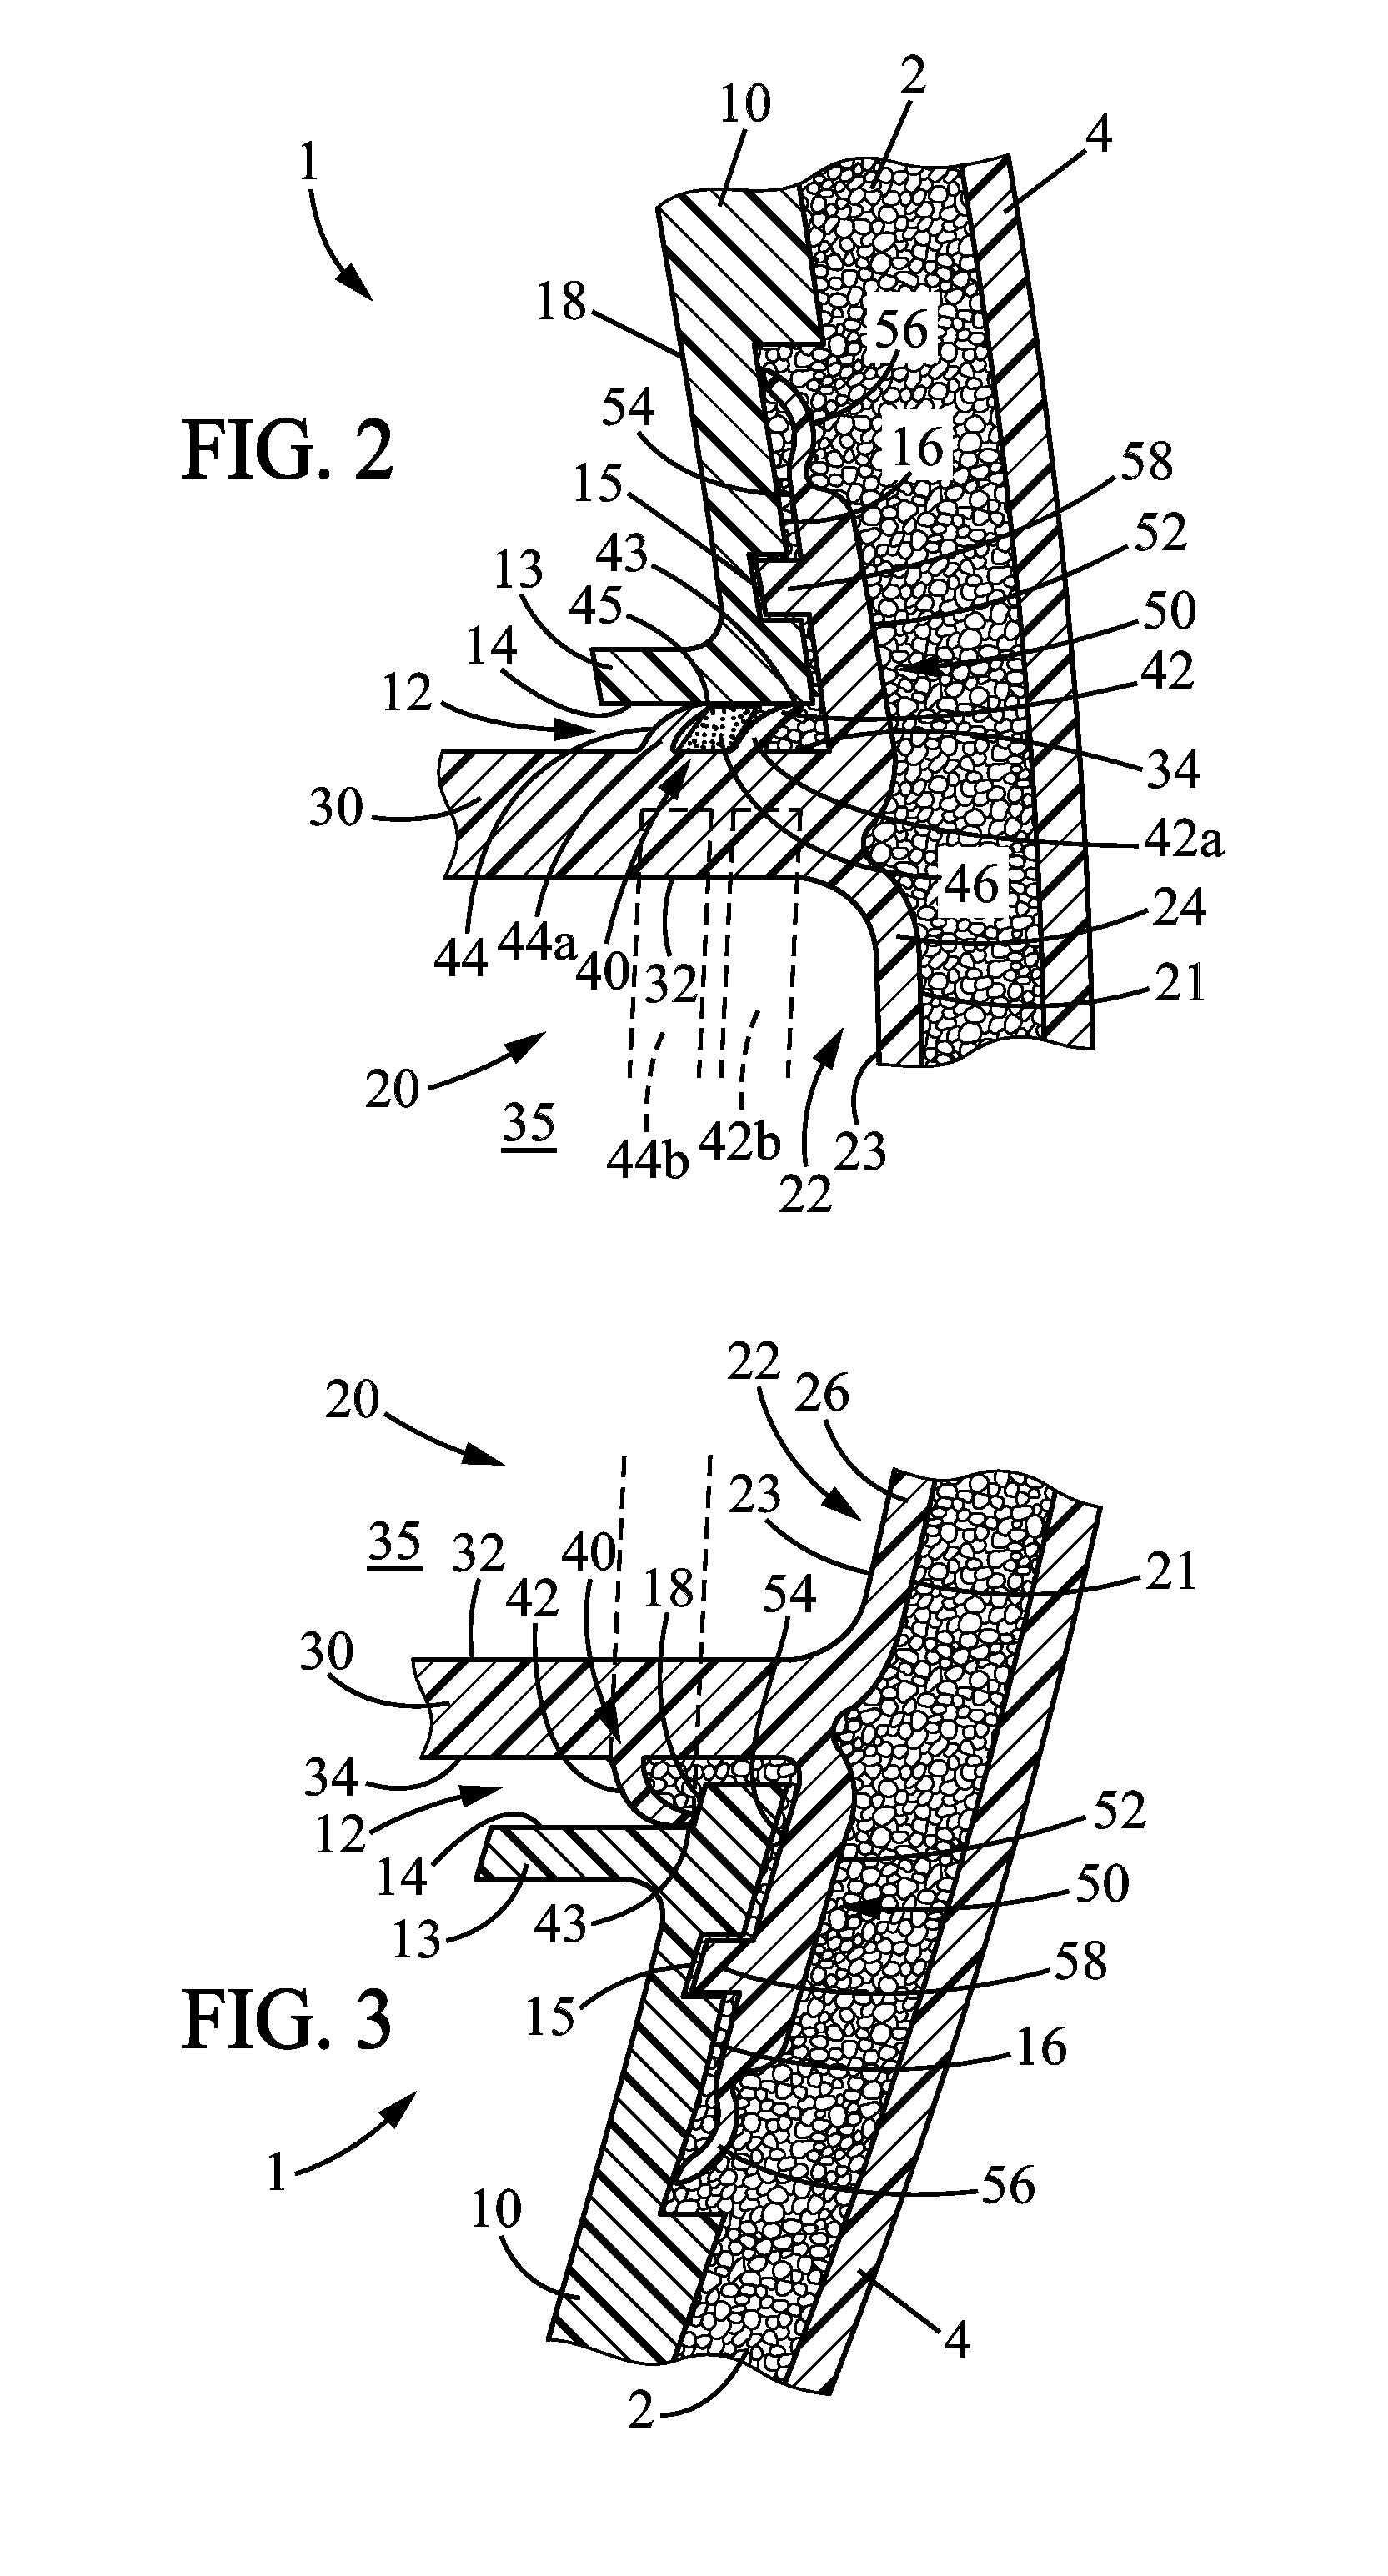 Interior Trim Part for a Motor Vehicle Comprising an Airbag Door